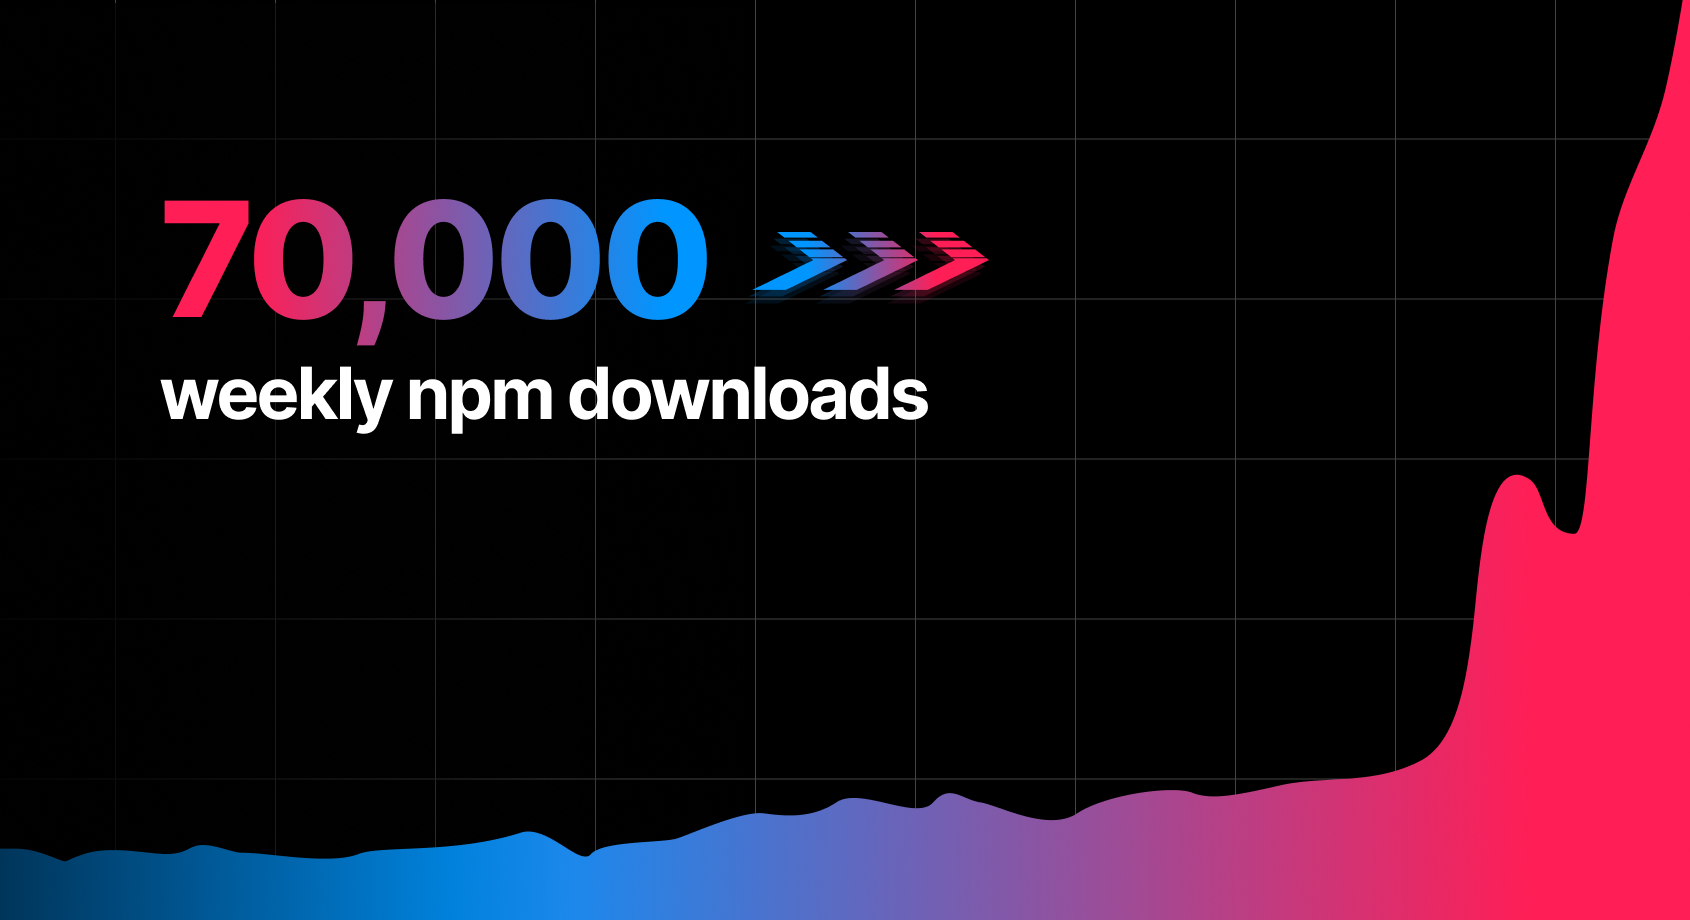 Weekly npm downloads of turbo